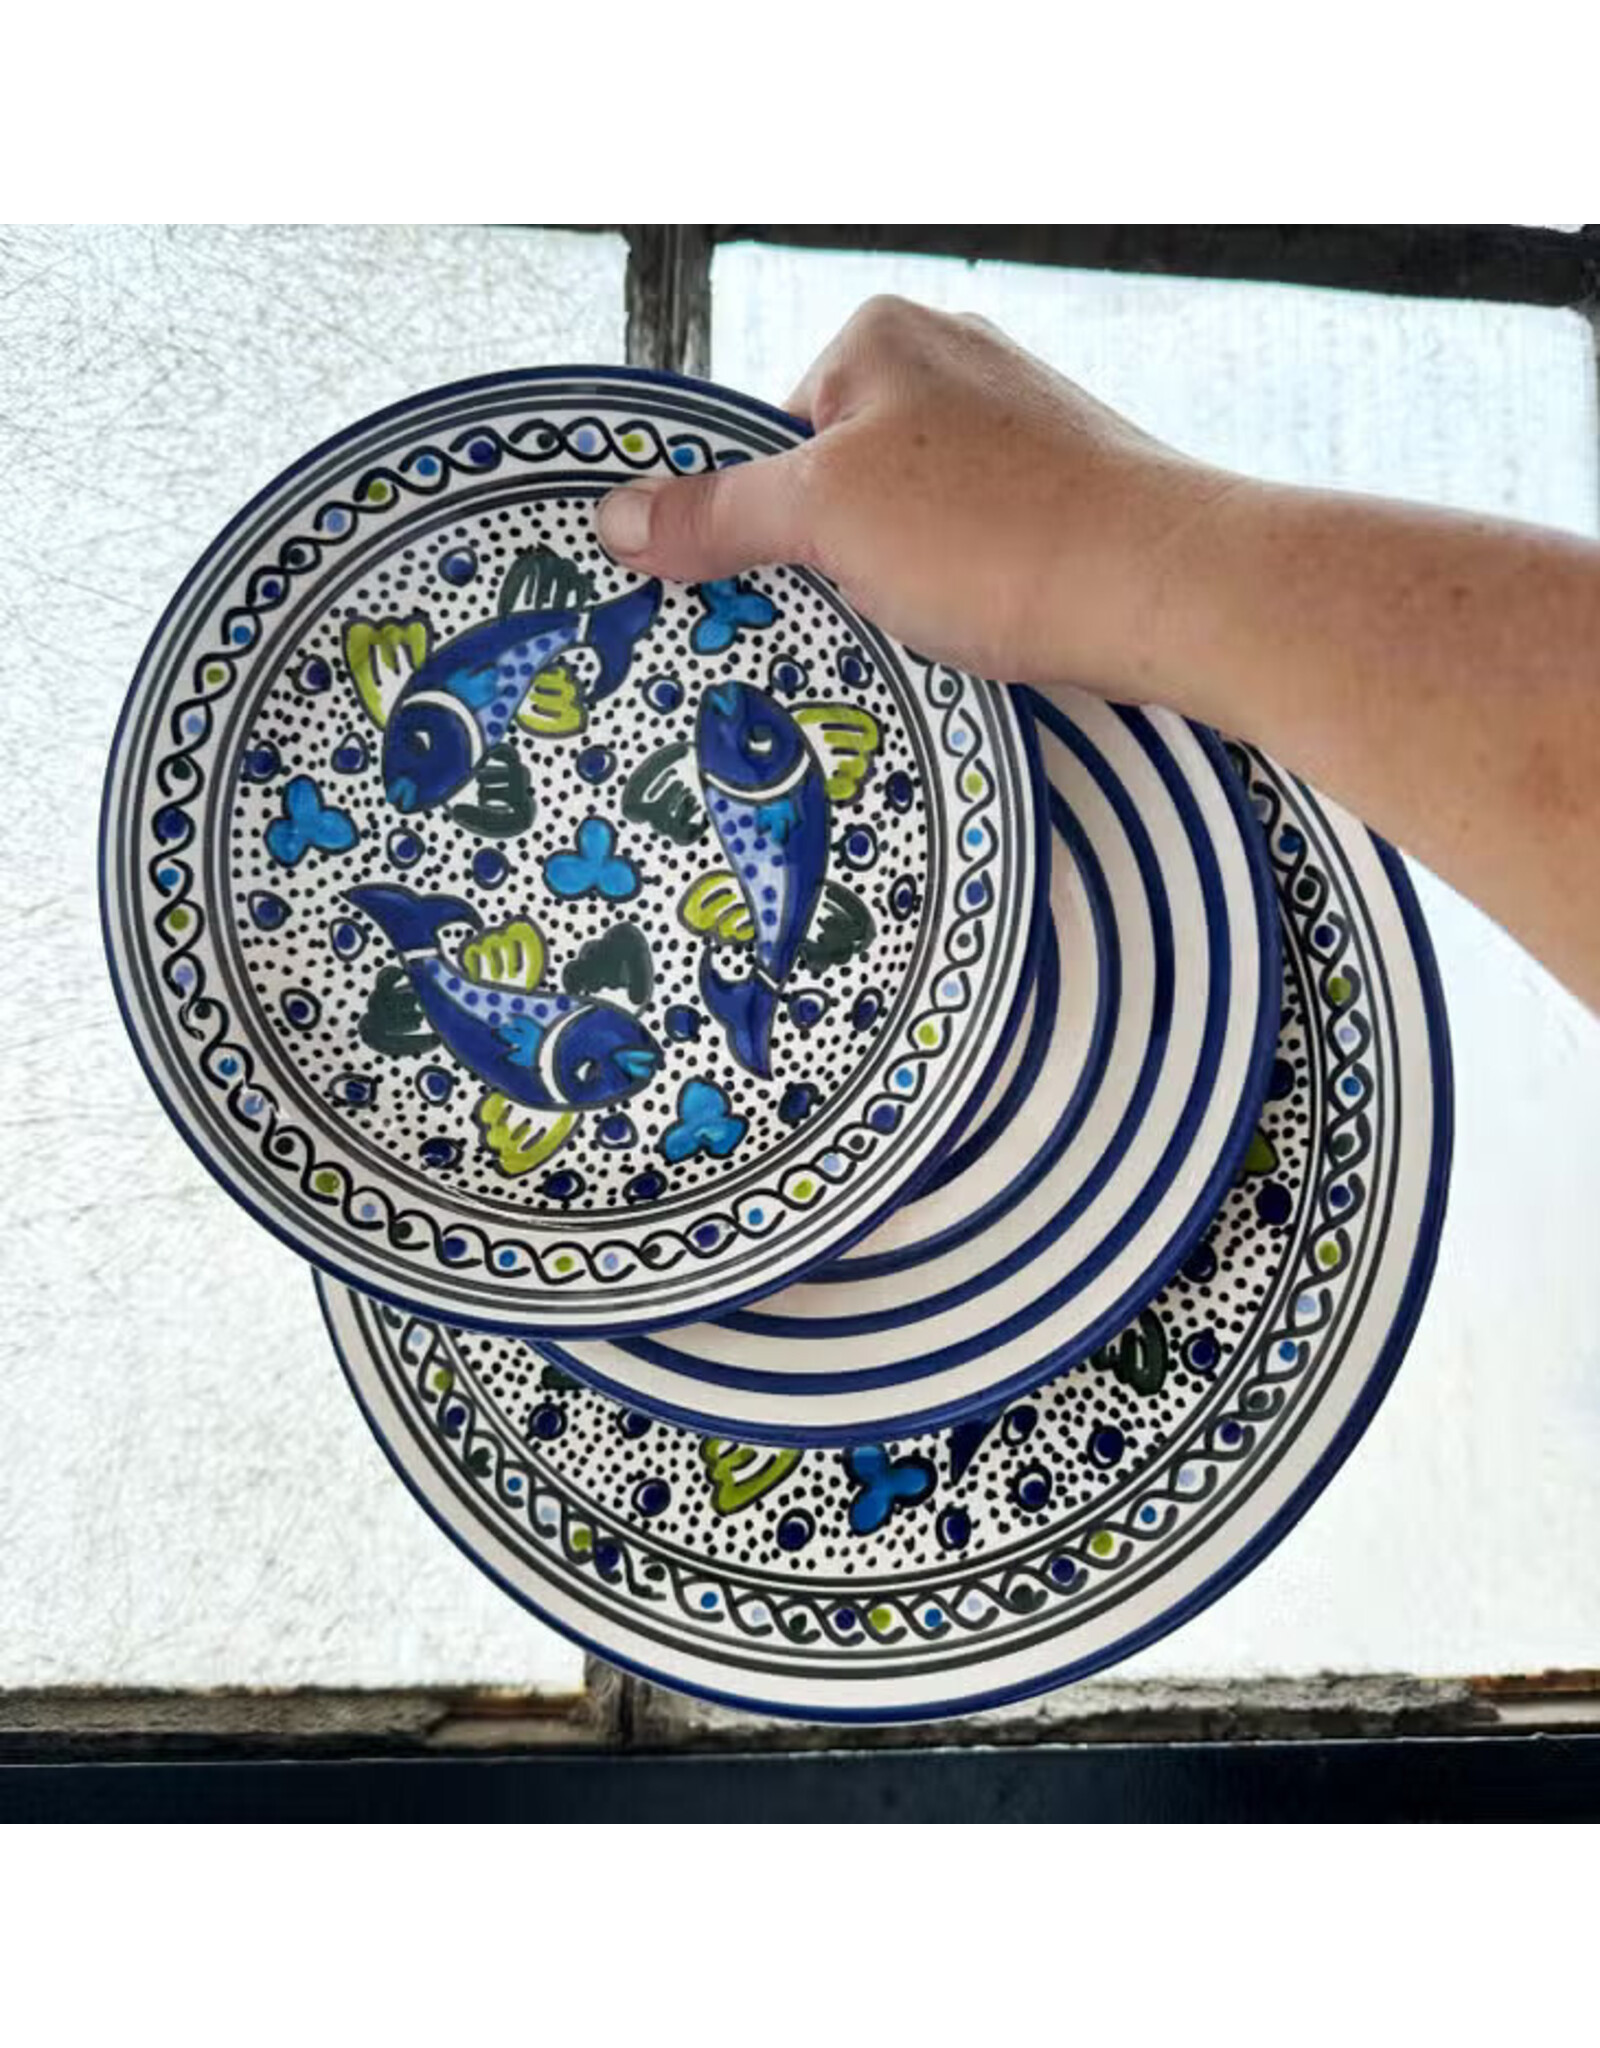 Trade roots Blue Fish Side Plate, Tunisia